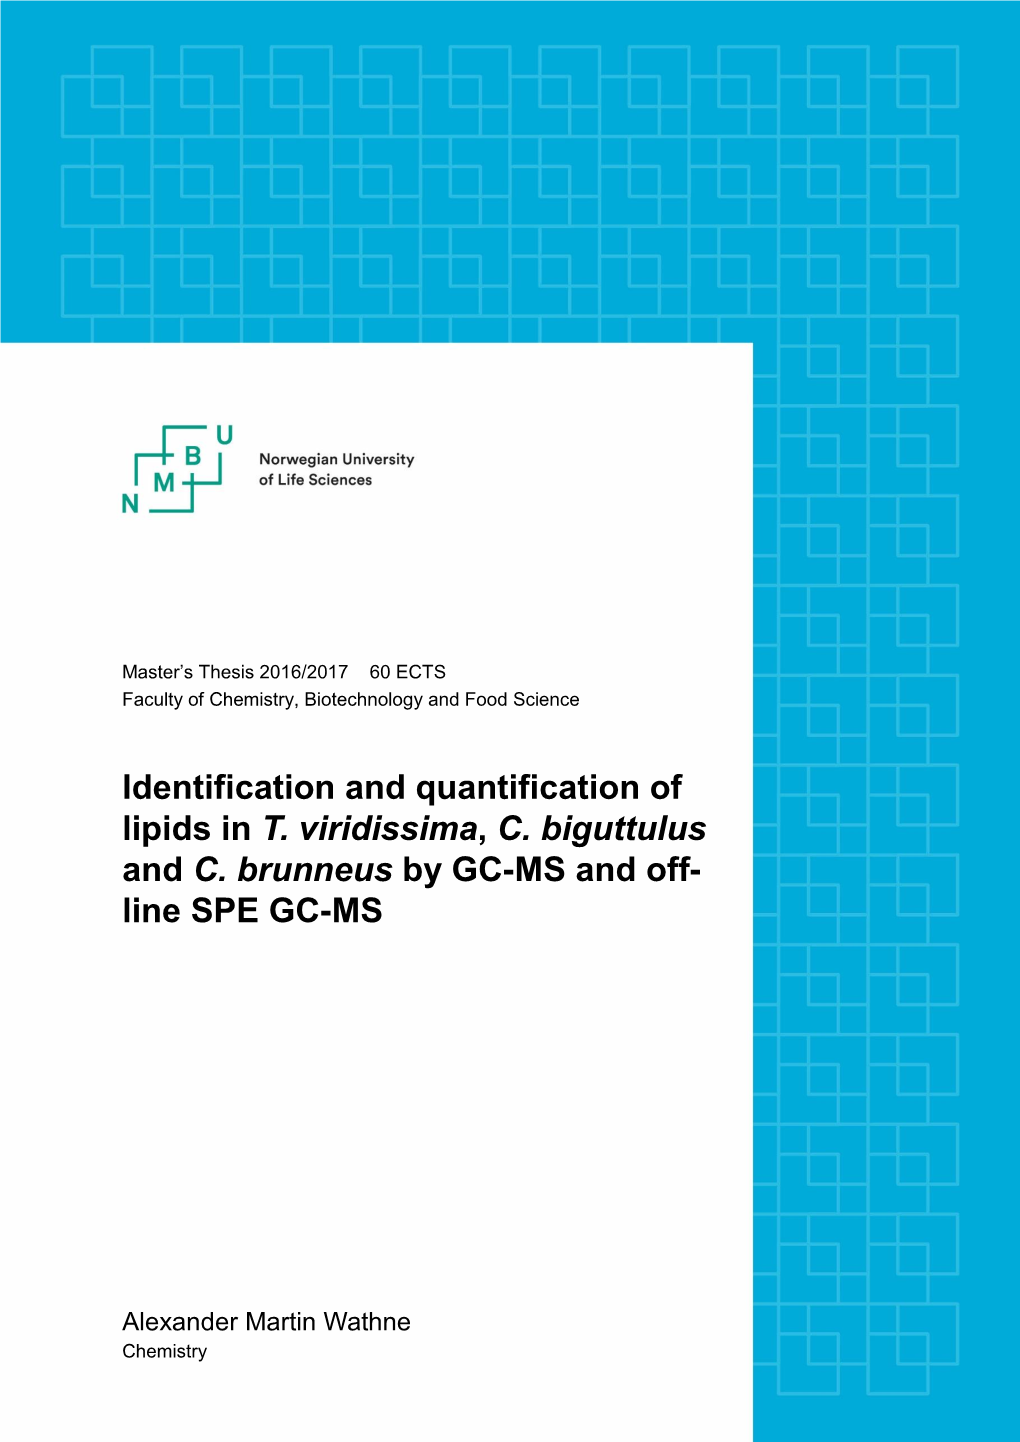 Identification and Quantification of Lipids in T. Viridissima, C. Biguttulus and C. Brunneus by GC-MS and Off- Line SPE GC-MS